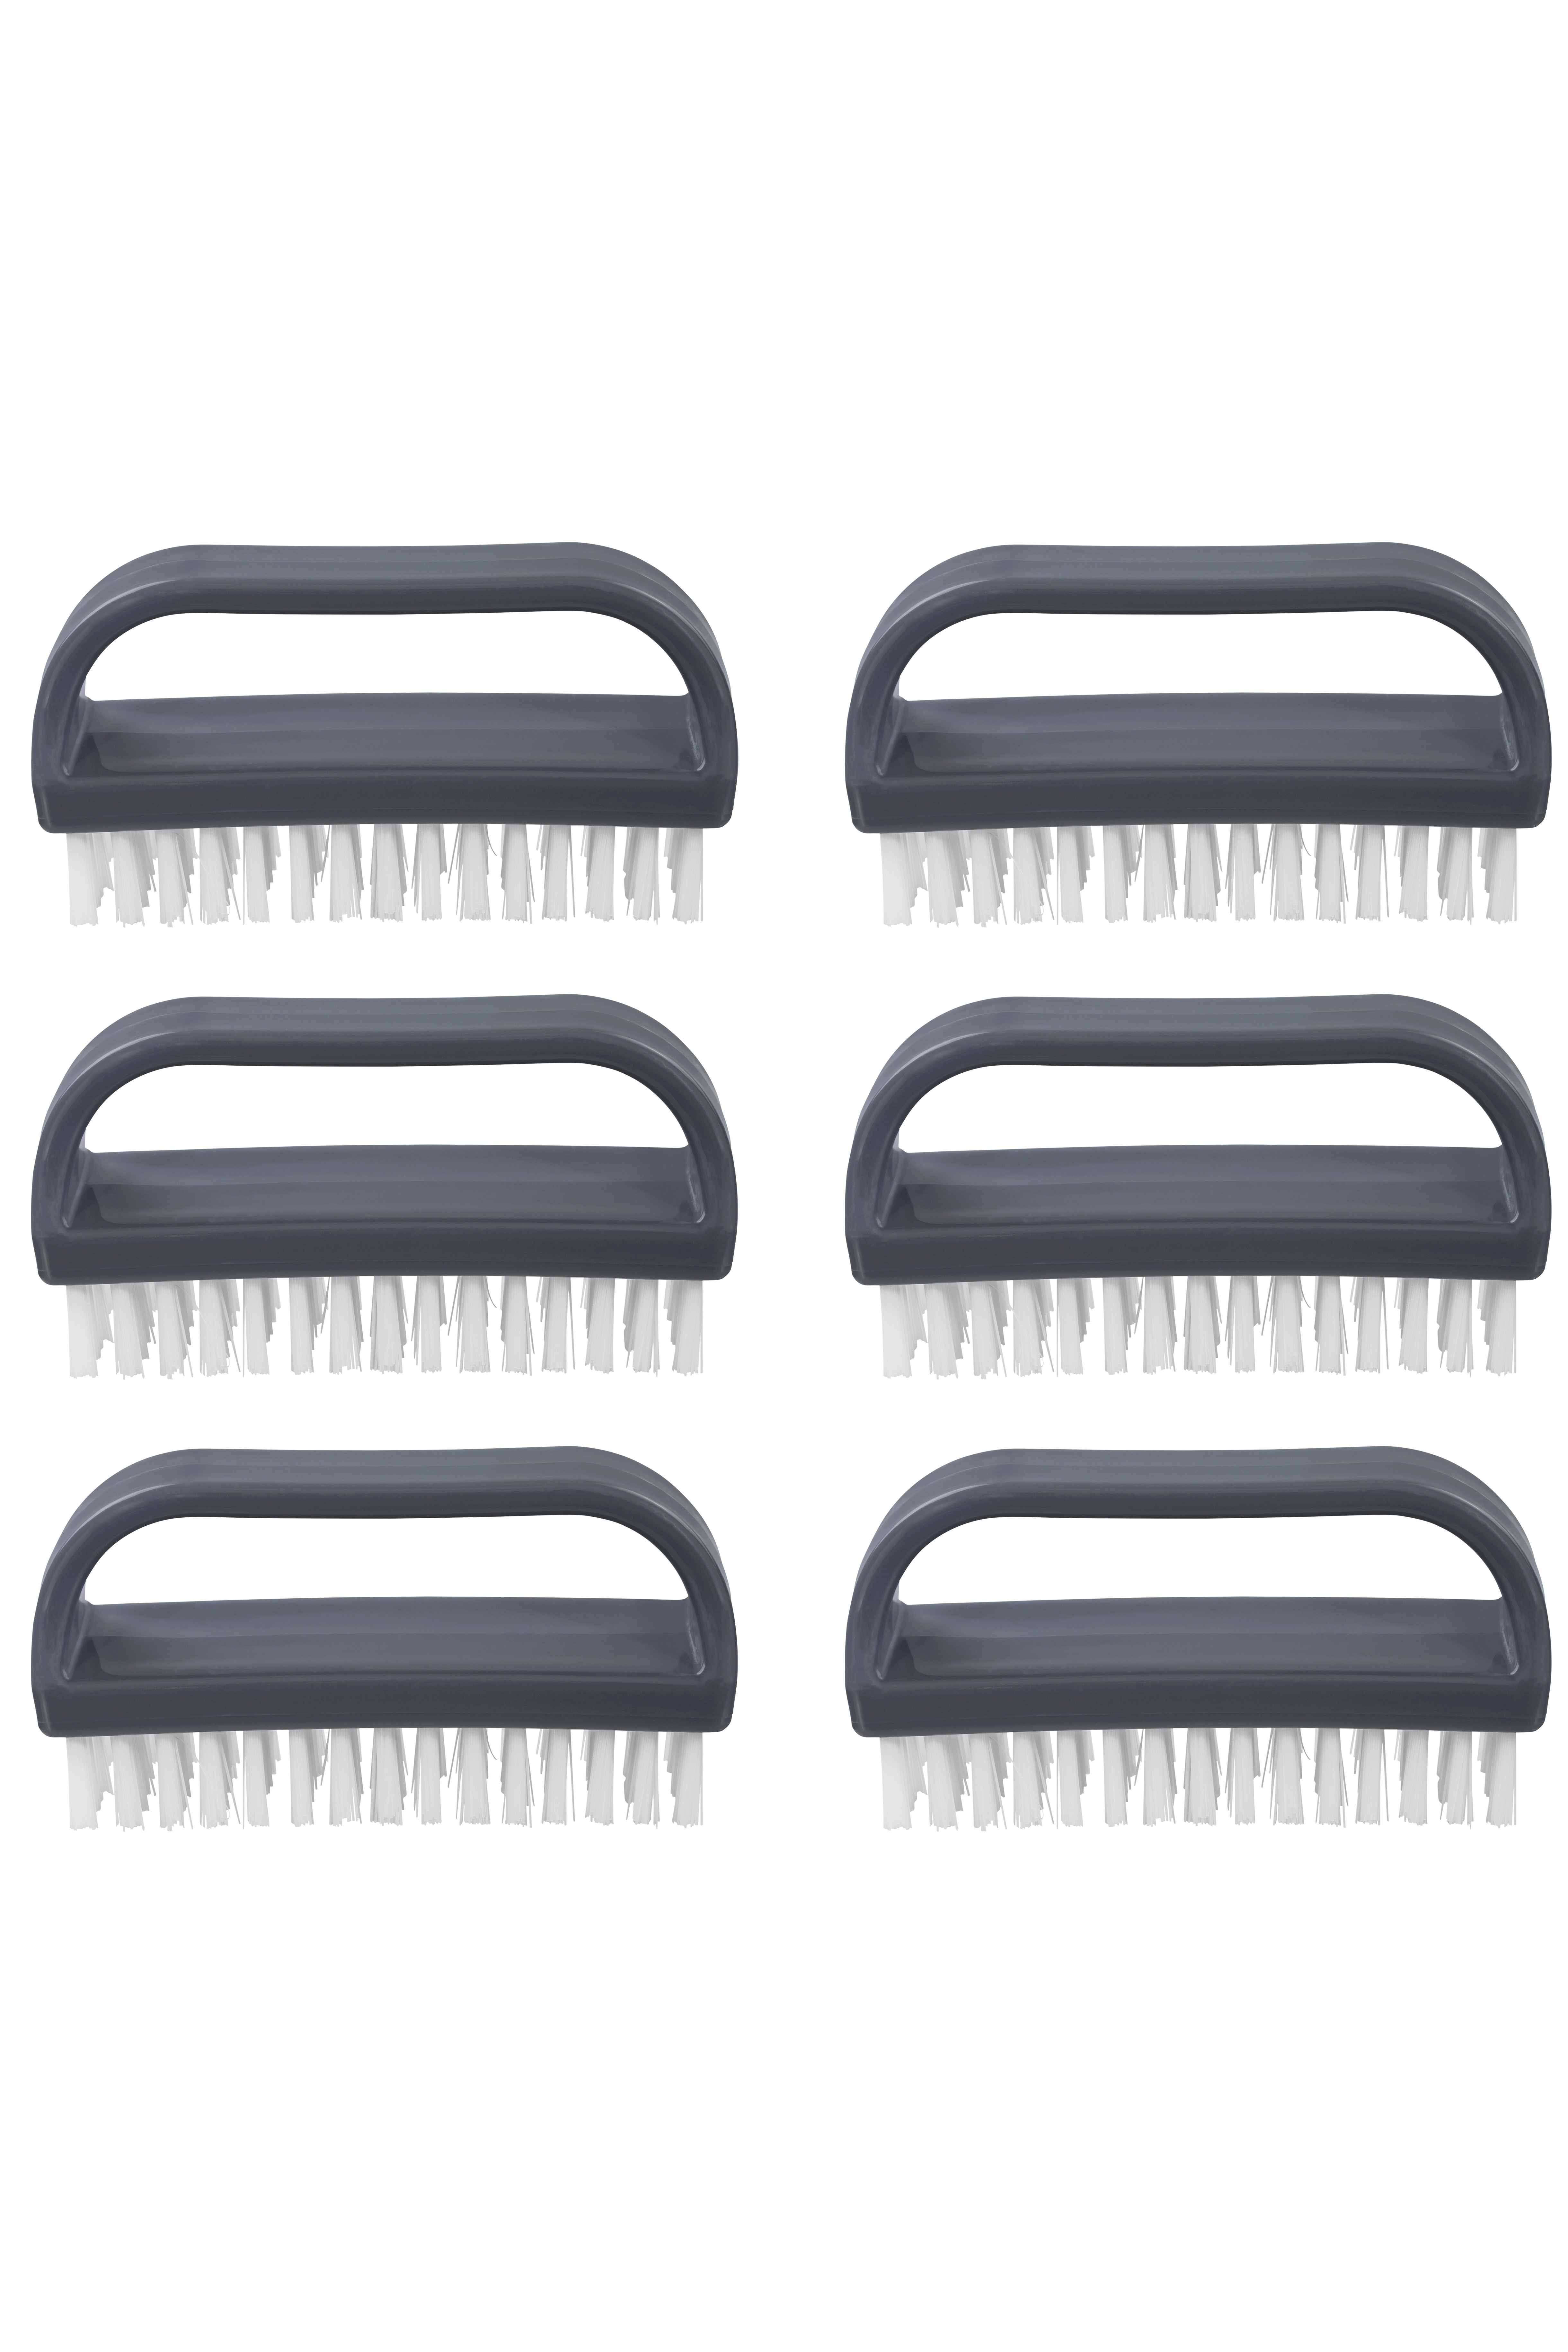 Superio Stiff Grey Nail Brush Cleaner with Handle 6 Pack, Durable Scrub  Brush, Clean Toes, Fingernails- Hand Scrubber- All-Purpose Cleaning Brush  for